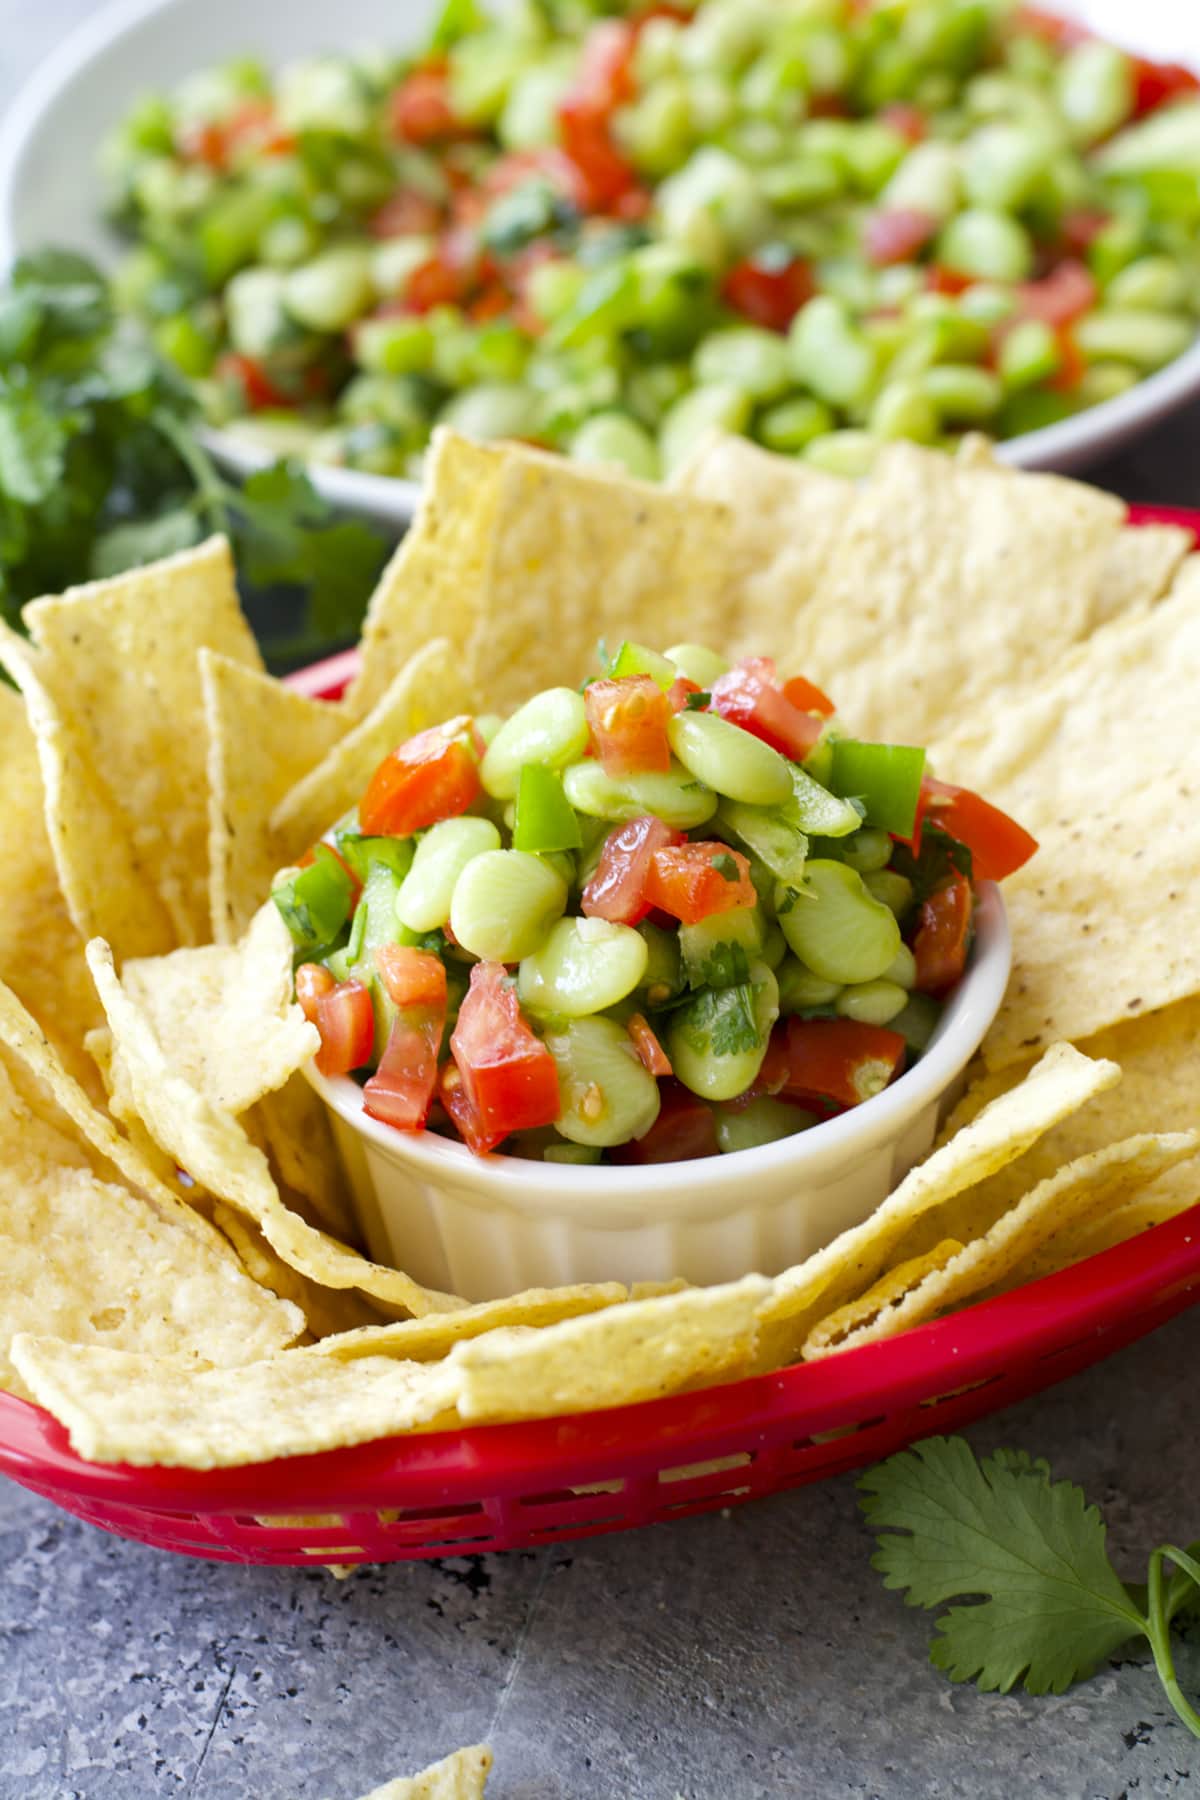 Tender Lime Beans are combined with tomatoes and peppers and tossed in a zesty sauce! Grab some chips and get to snacking! You will love this easy Lima Bean Salsa!